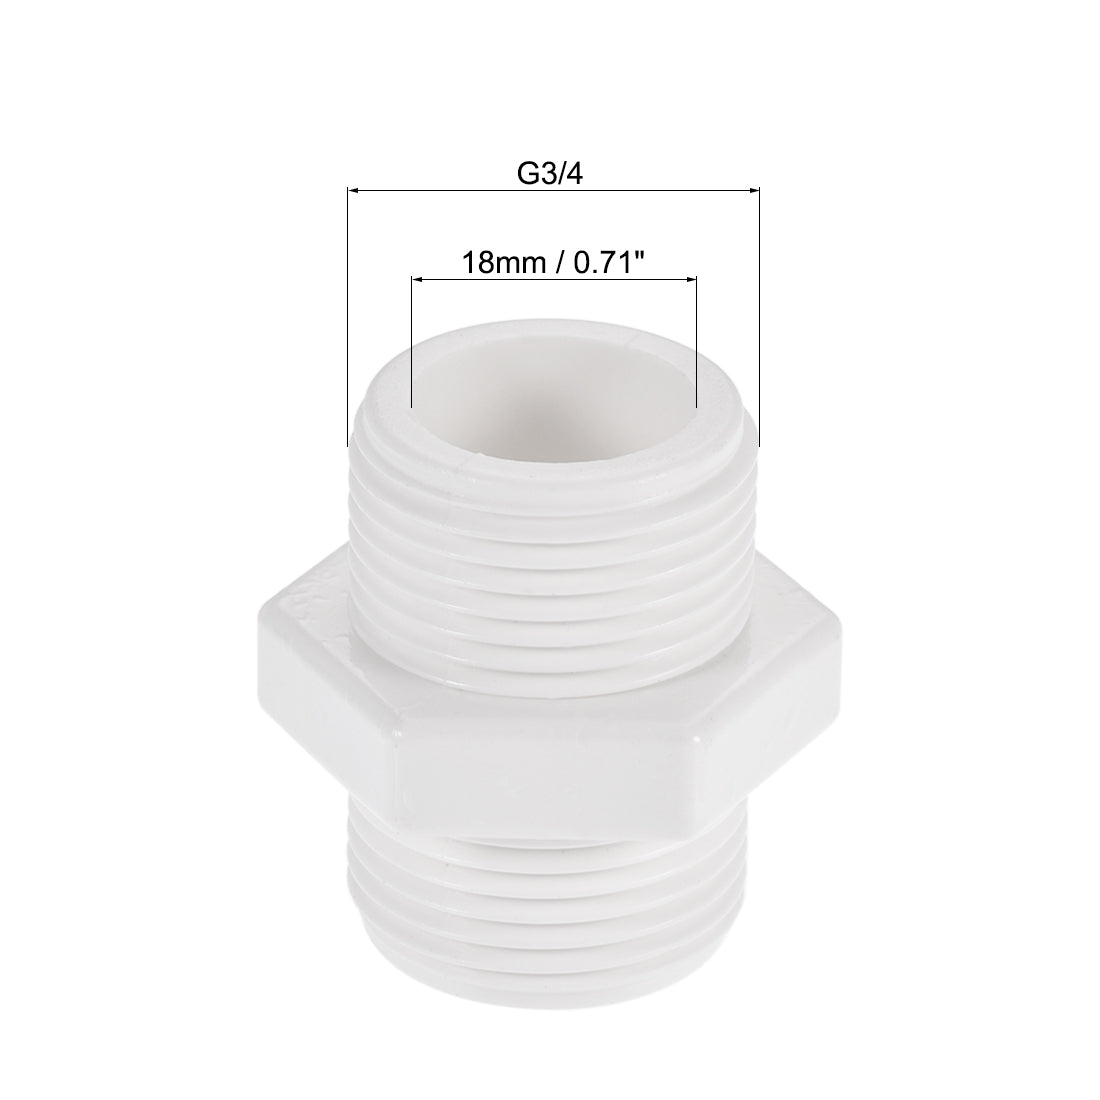 Uxcell Uxcell Pipe Fitting, G1 Male Thread, Hex Nipple Tube Adaptor Hose Connector, for Water Tanks, PVC, White, Pack of 6